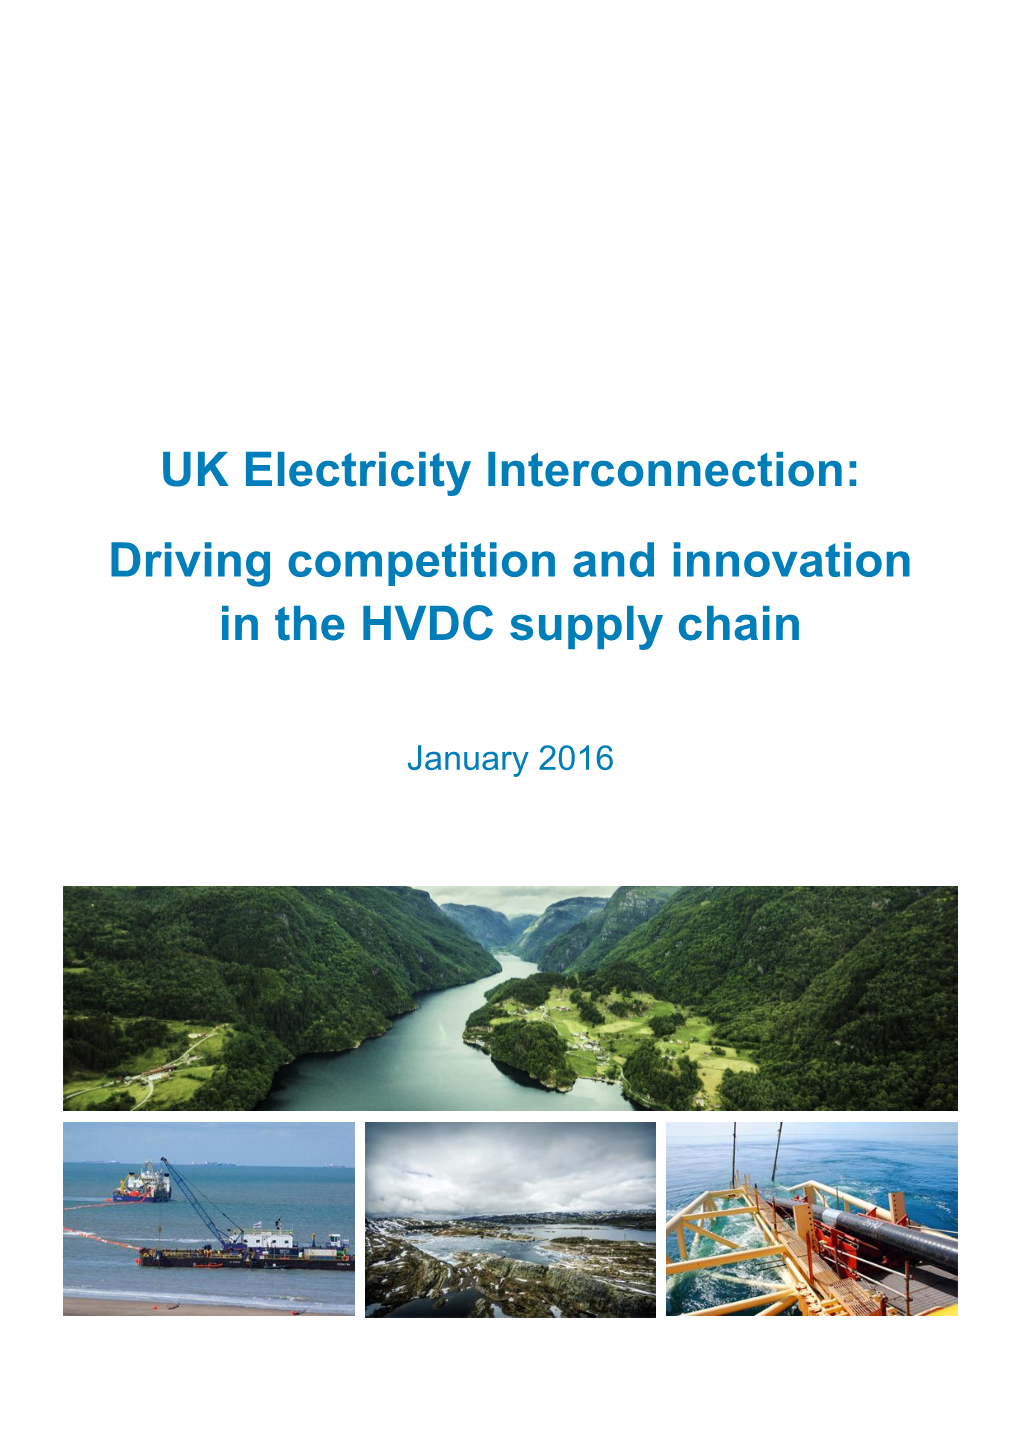 UK Electricity Interconnection: Driving Competition and Innovation in the HVDC Supply Chain